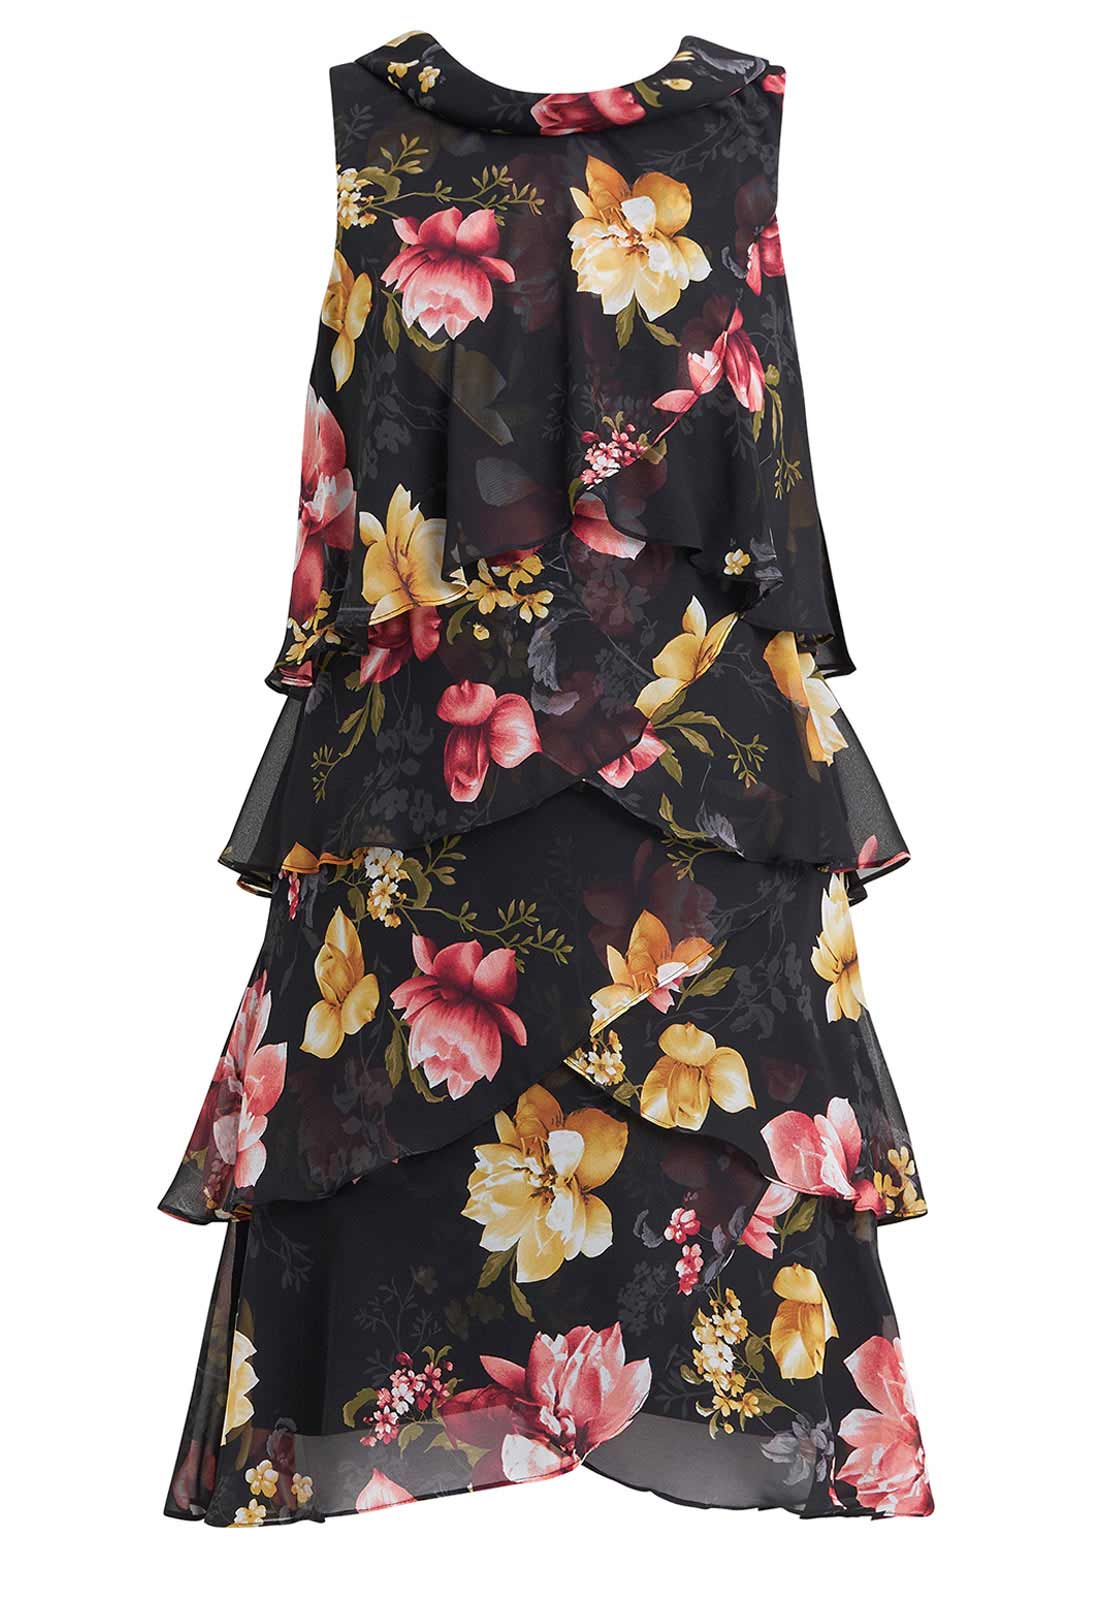 Gina Bacconi Candy Print Tiered Dress With Foldover Neckline